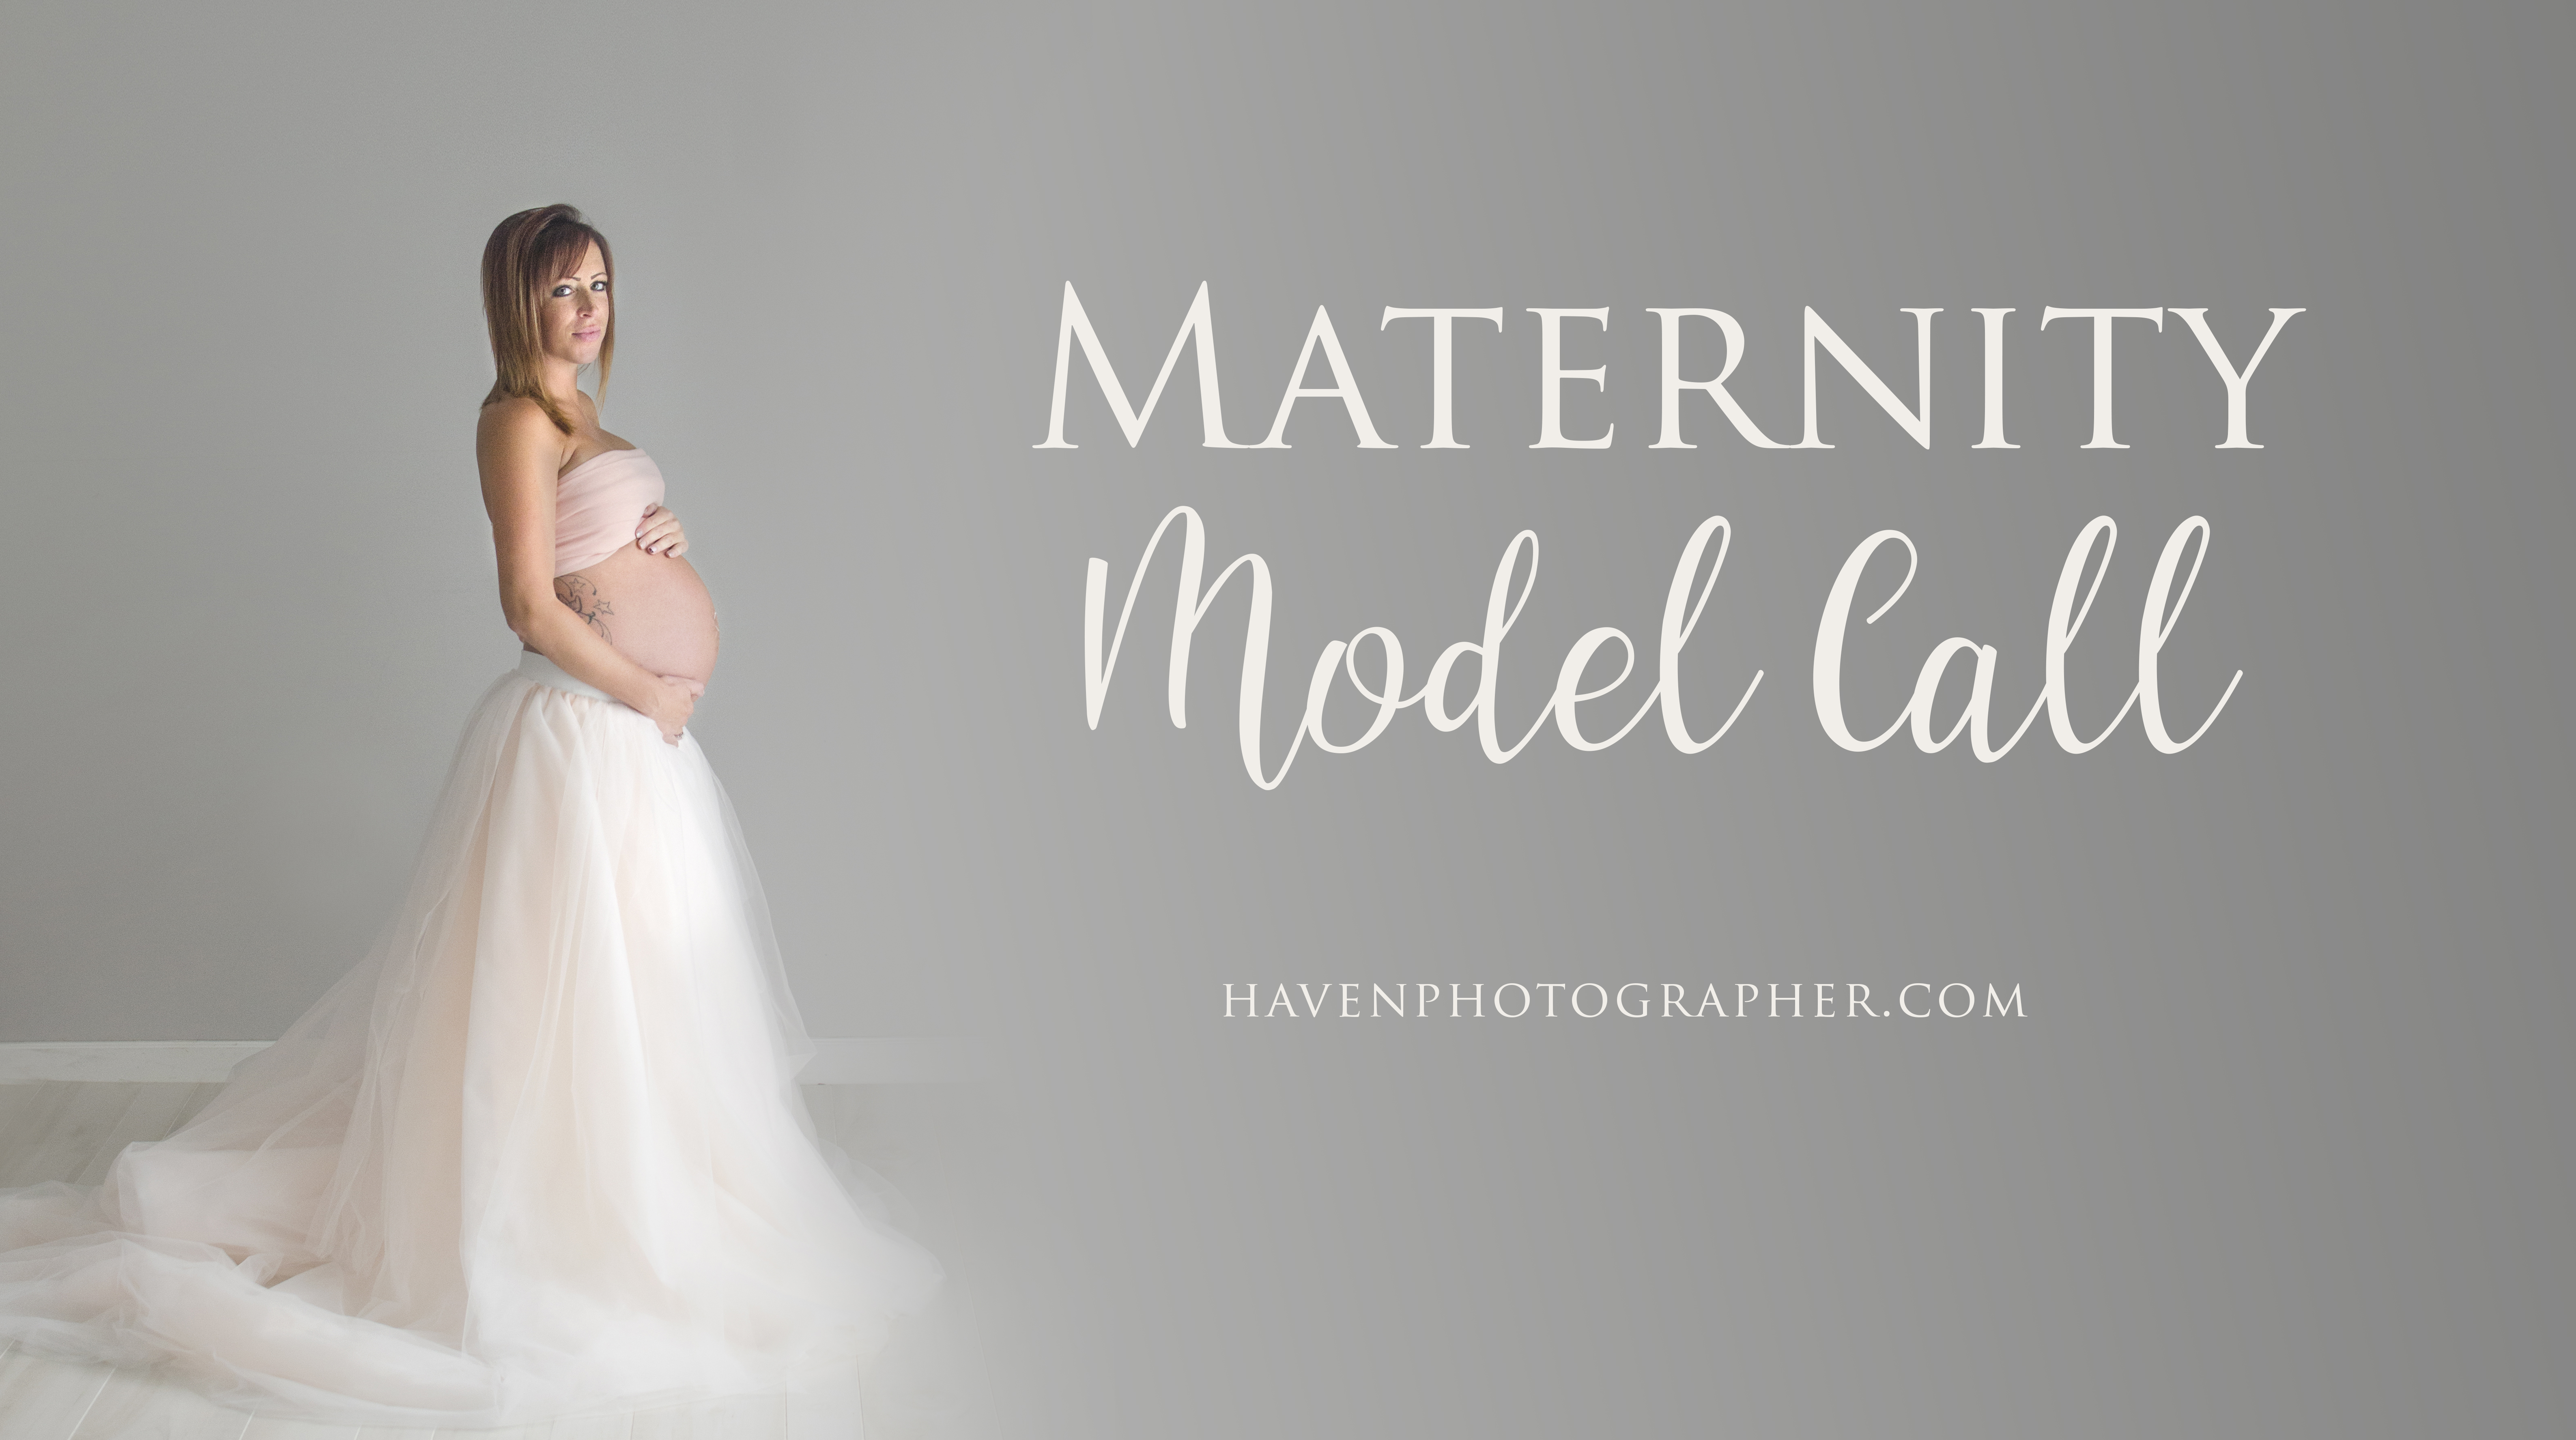 Maternity Model Call » Haven Photography